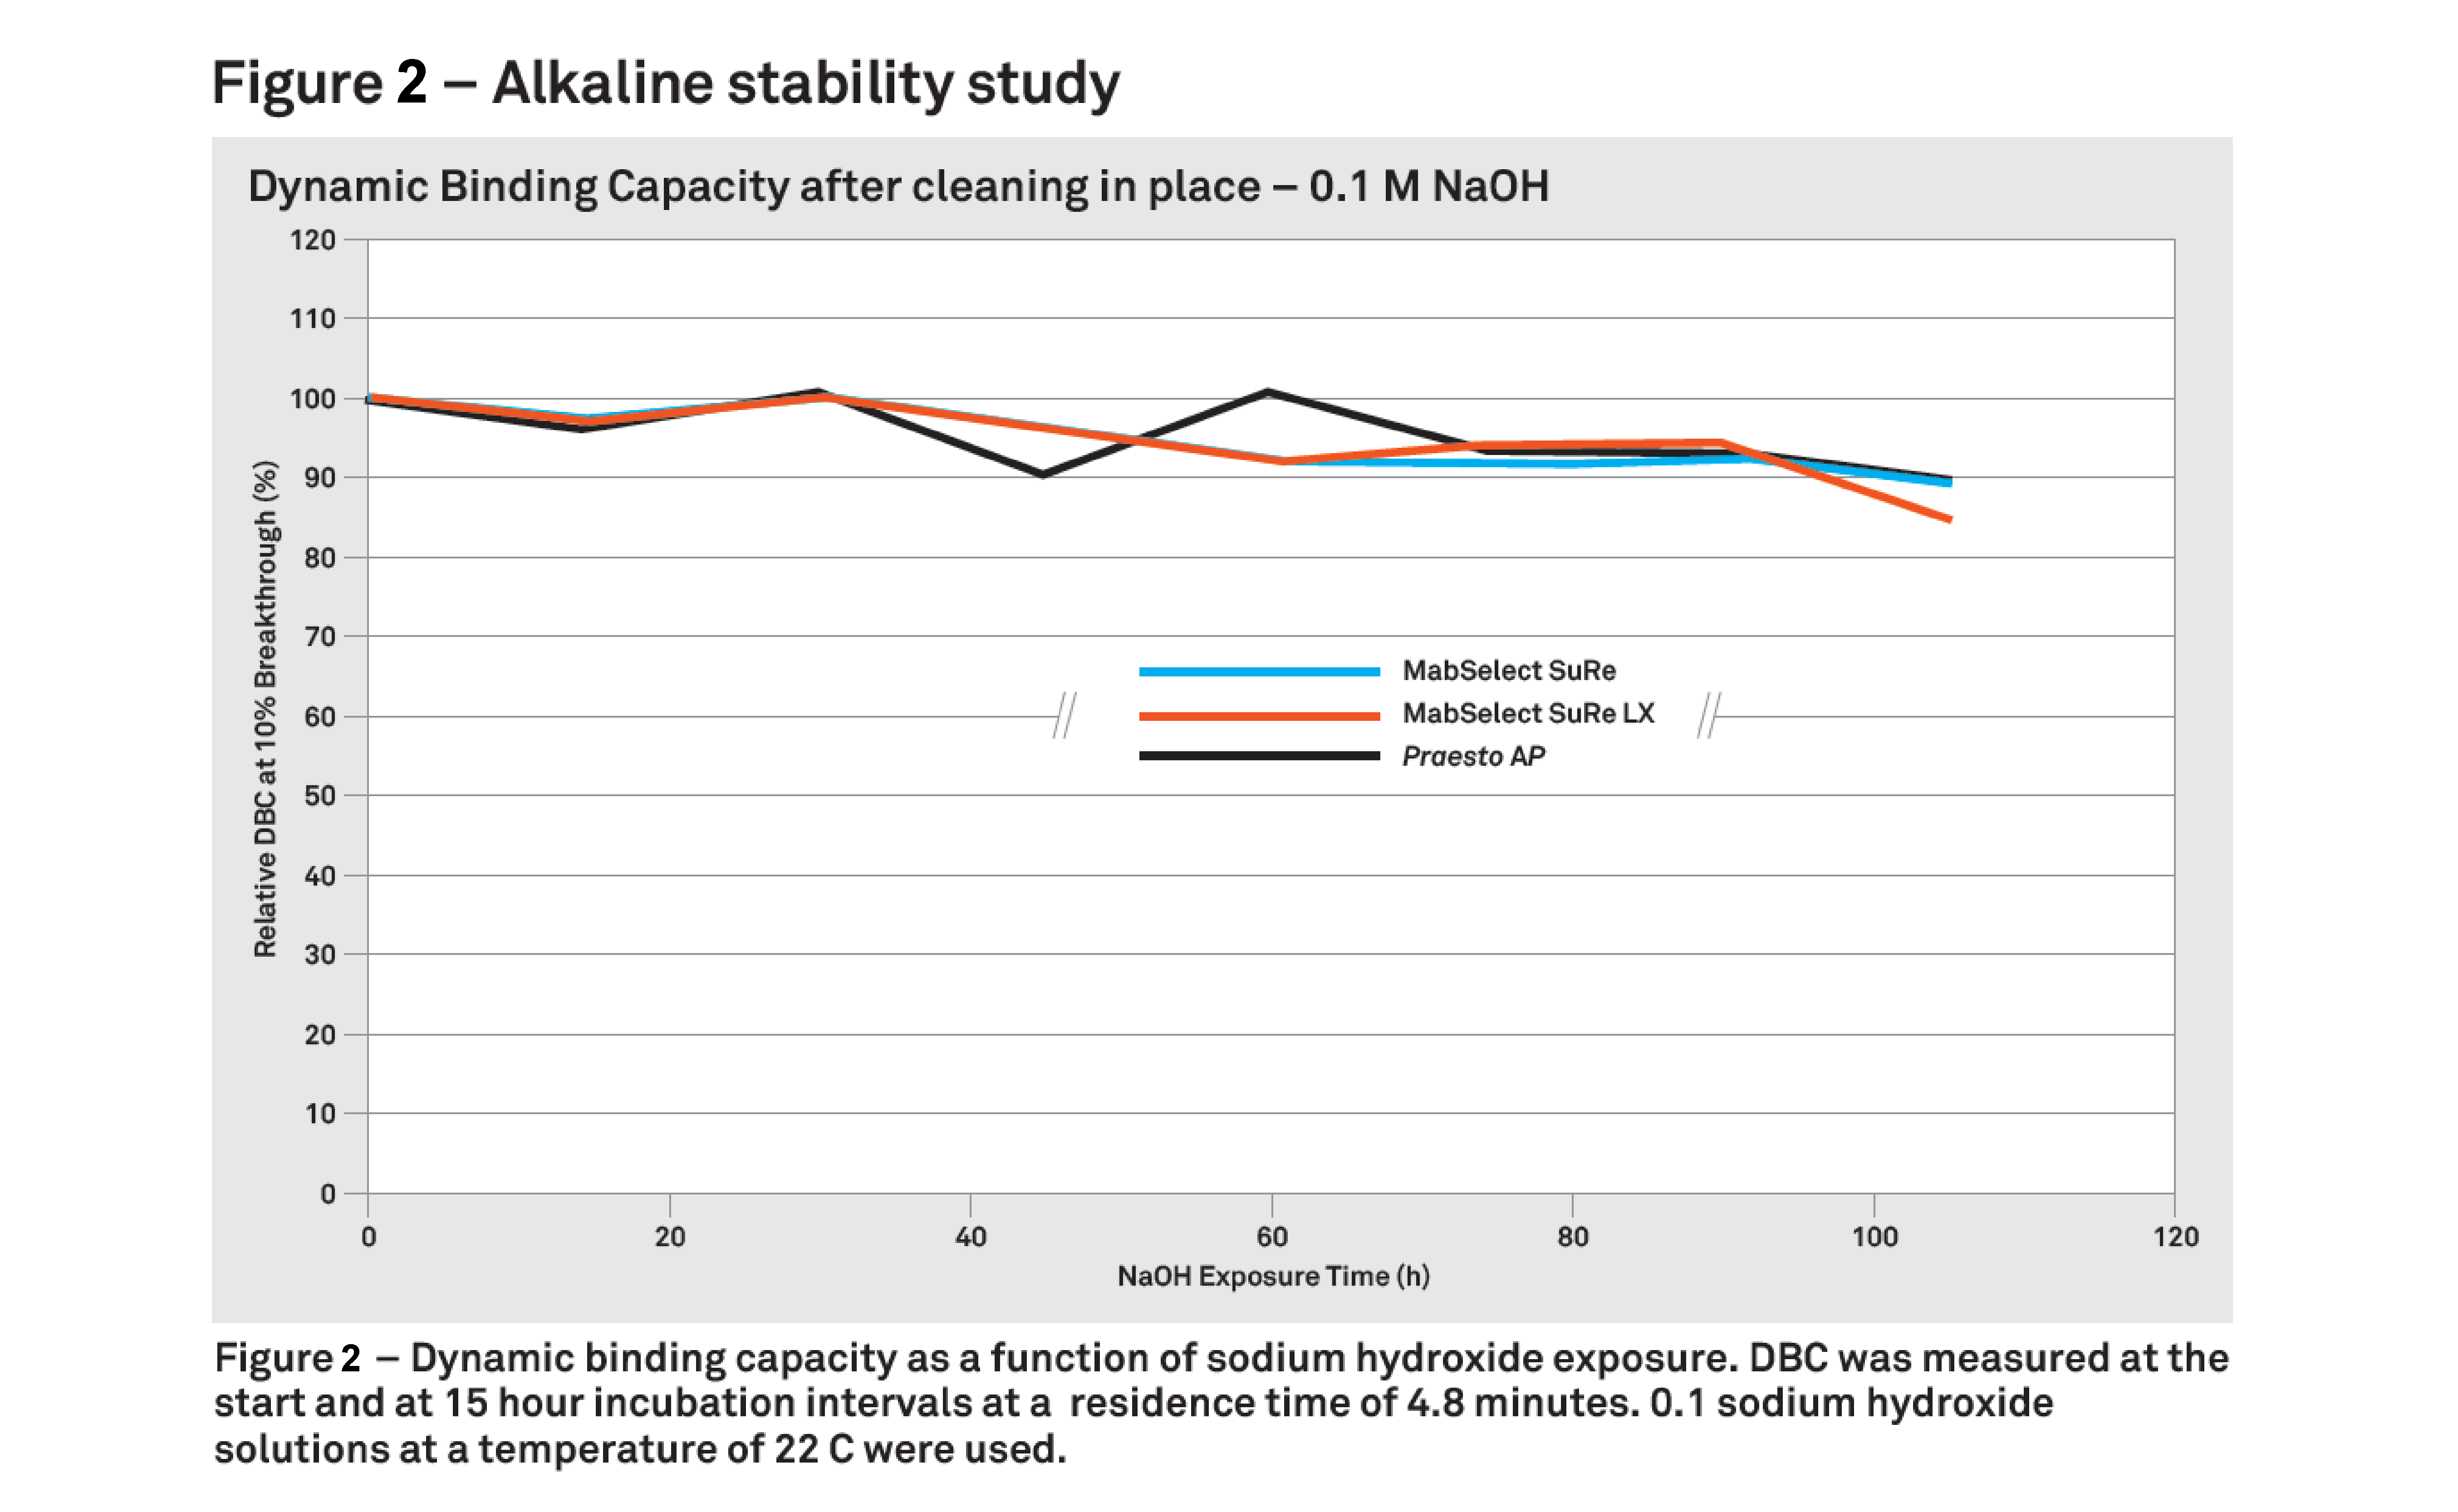 dynamic binding capacity after cleaning in place of Praesto AP vs. other resins.